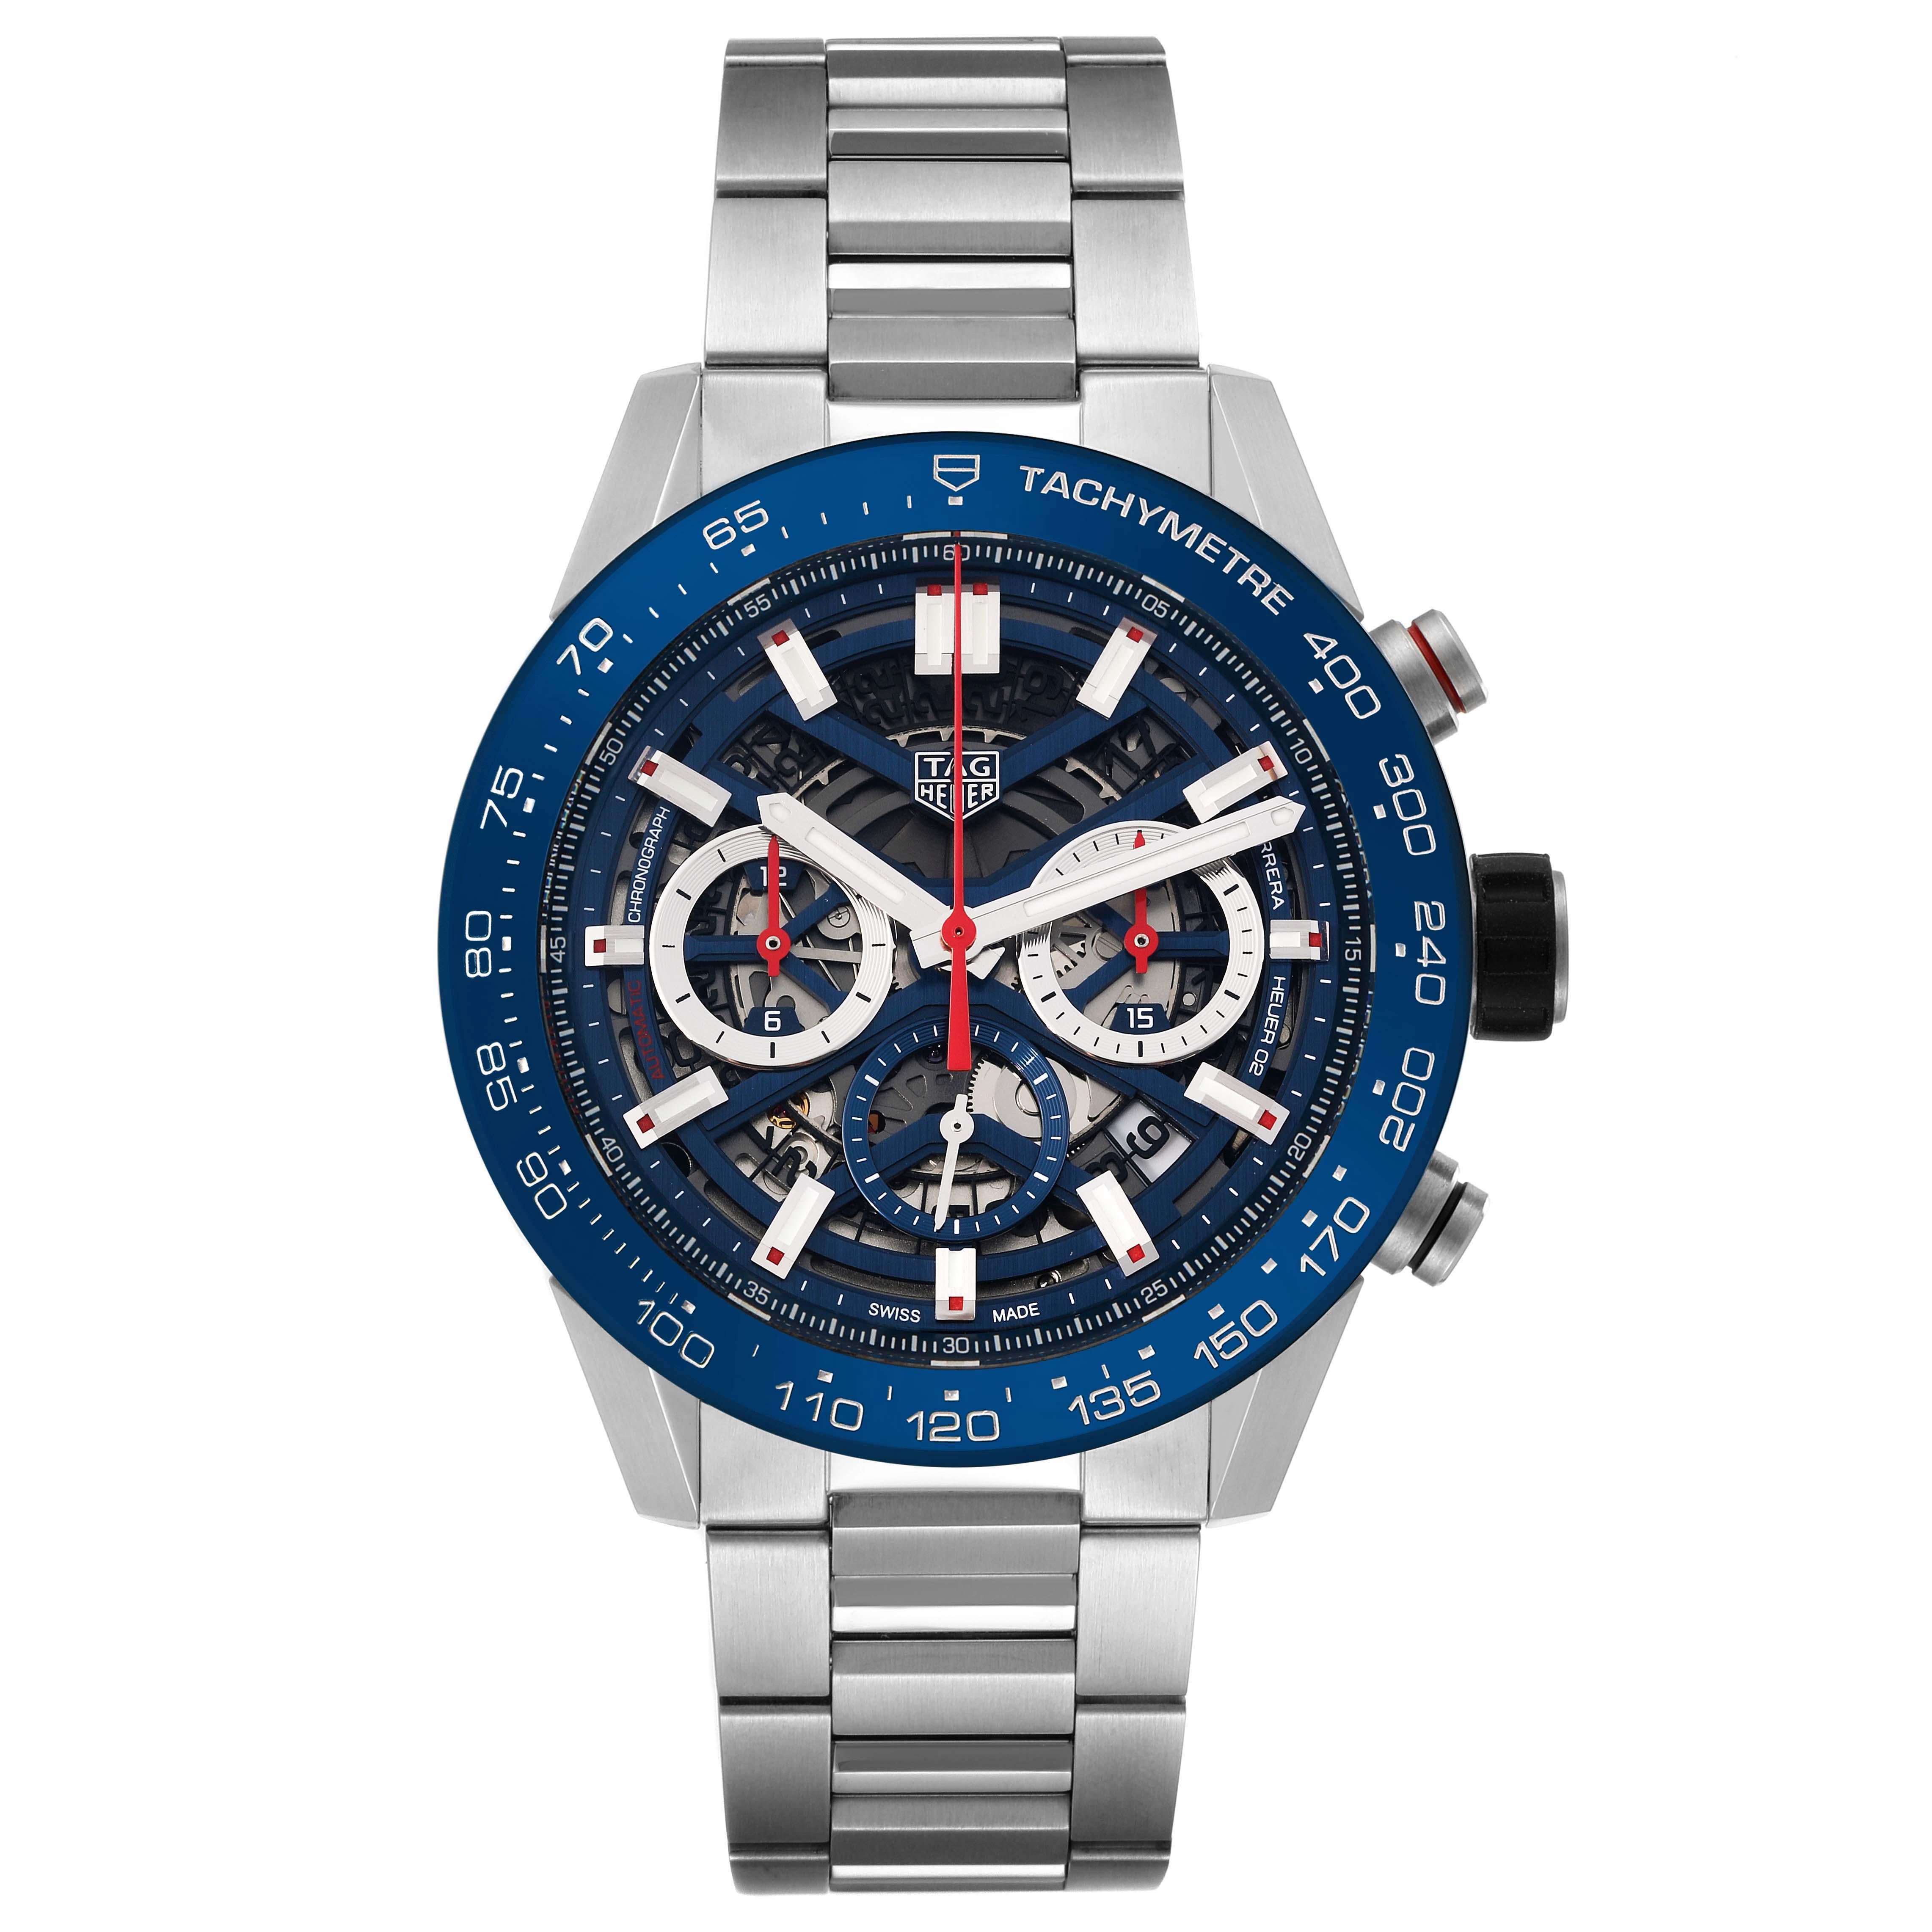 Tag Heuer Carrera Blue Skeletonized Dial Steel Mens Watch CBG2A11 Box Card. Automatic self-winding chronograph movement. Stainless steel case 45.0 mm. Exhibition transparent sapphire crystal case back. Crown with rubber grip. Blue ceramic bezel with